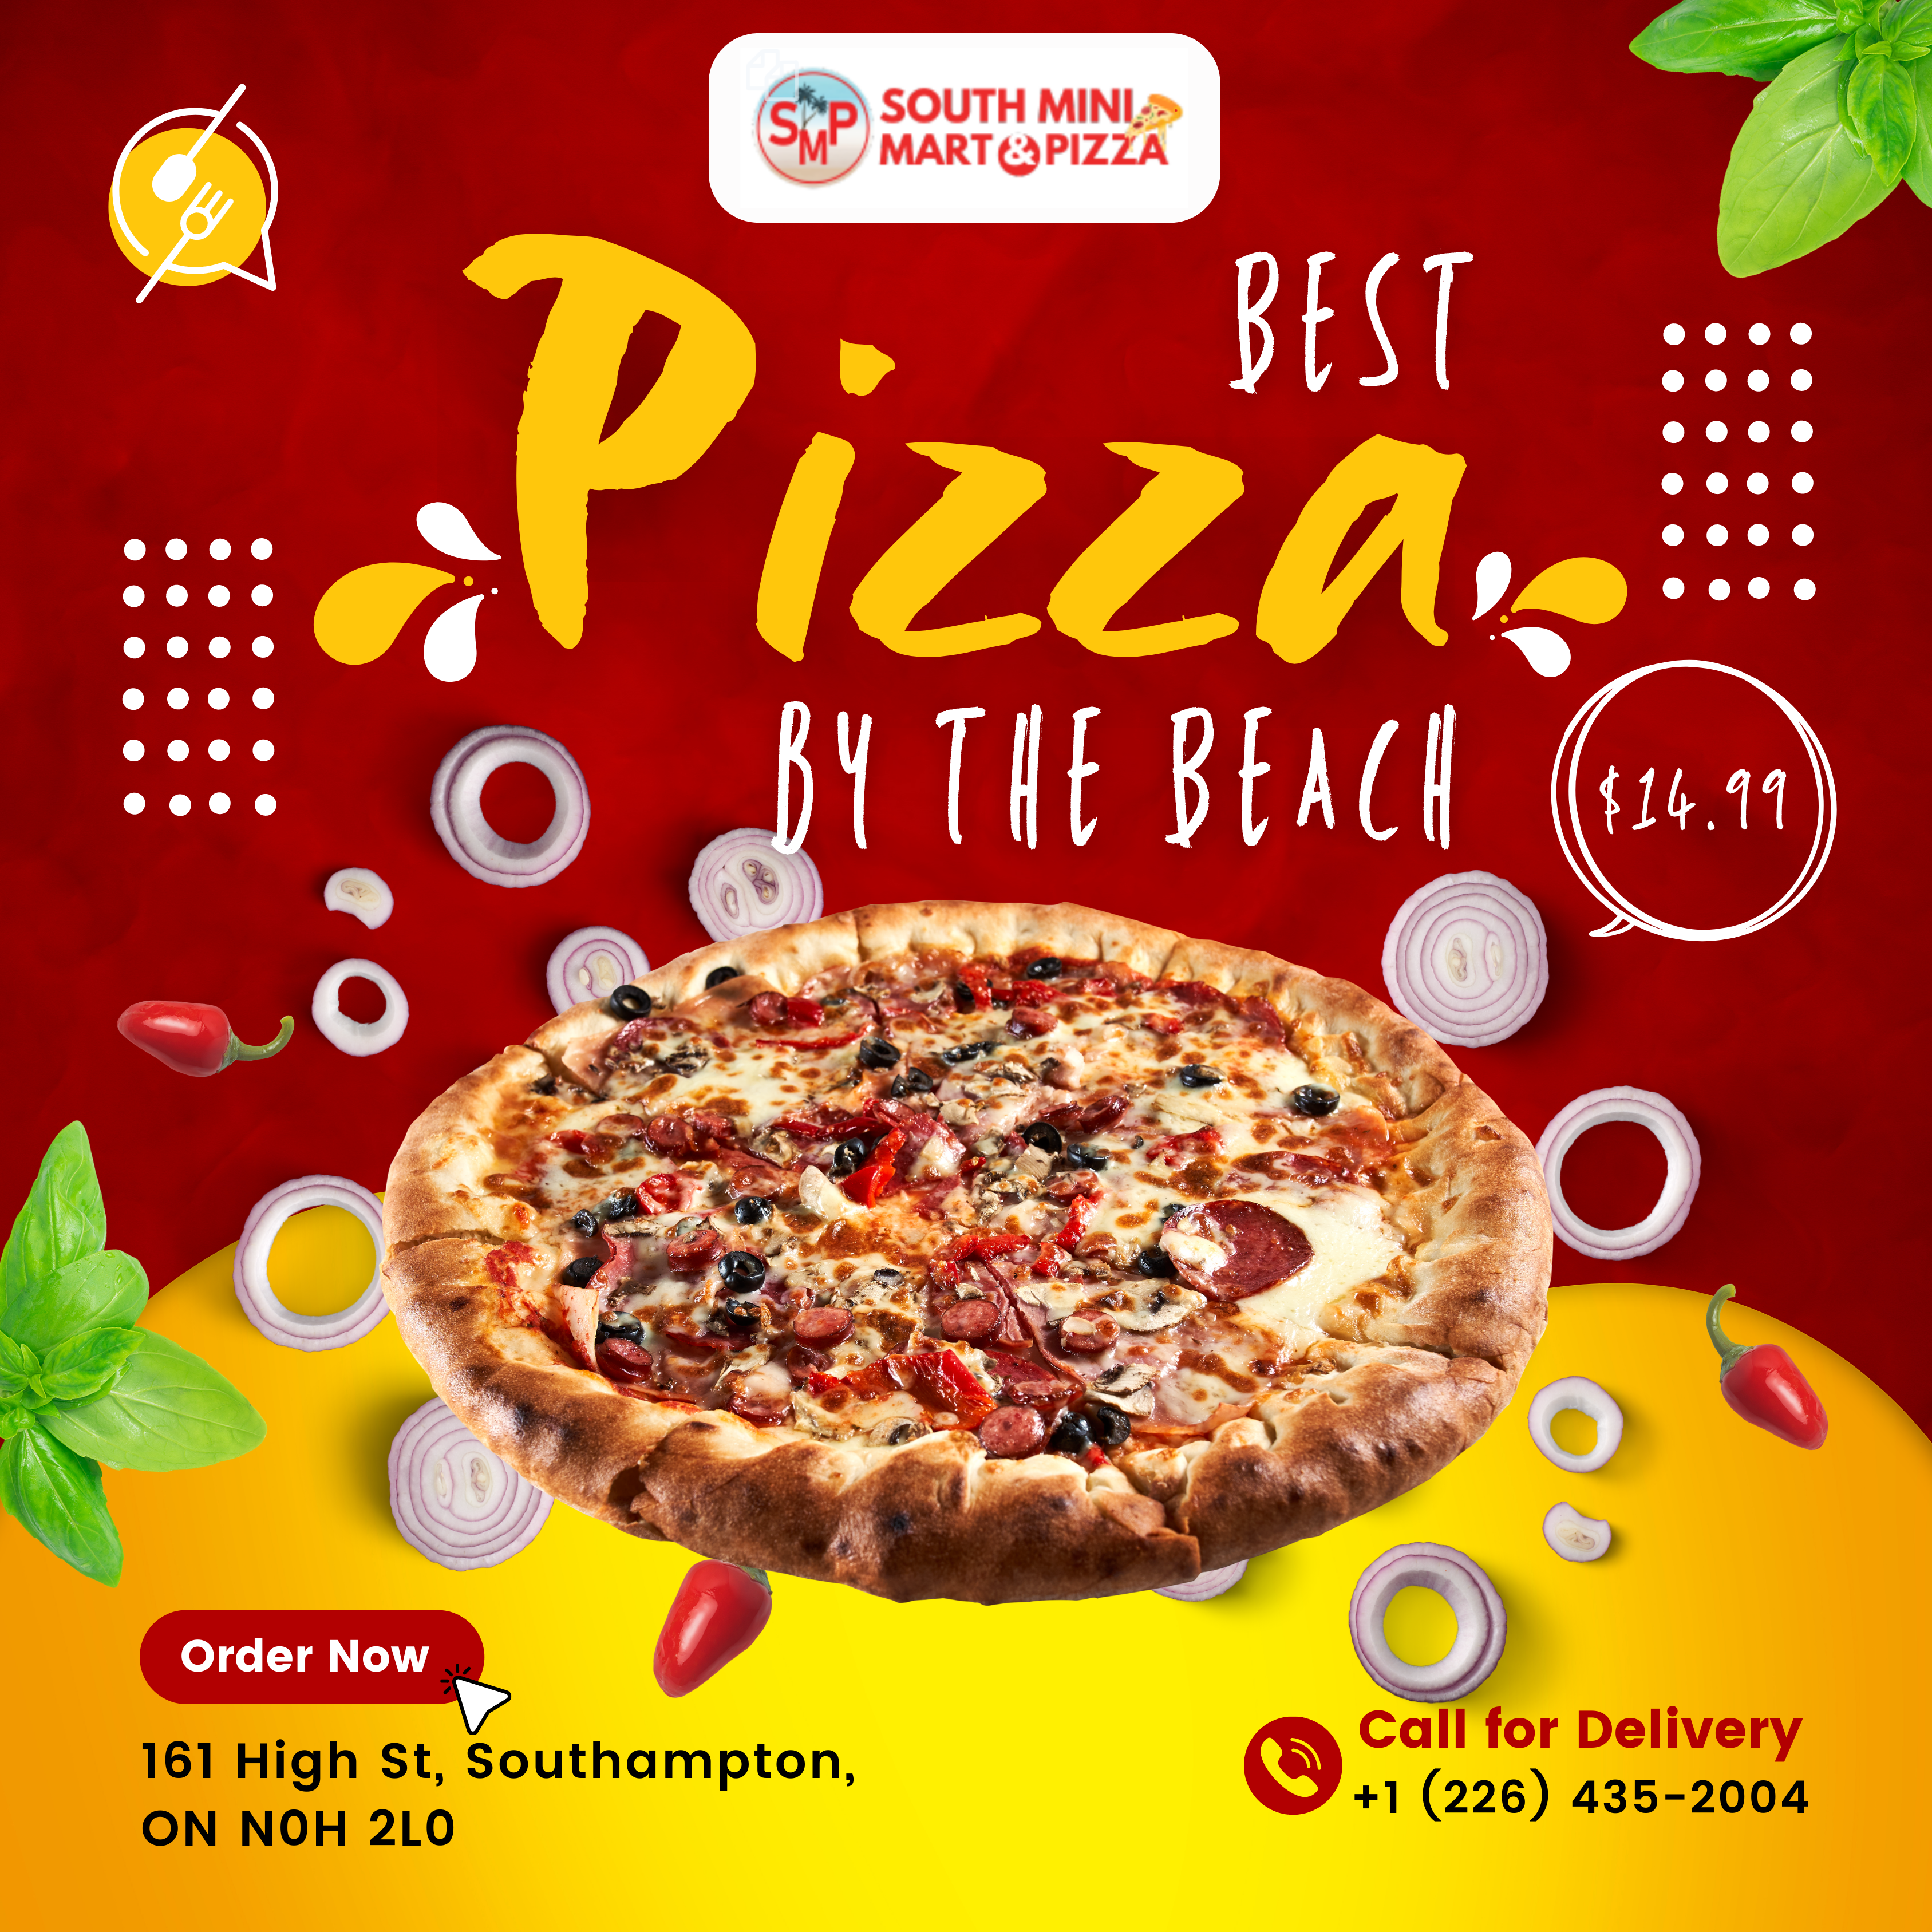 Enjoy the Best Pizza by the Beach at Southampton, Ontario